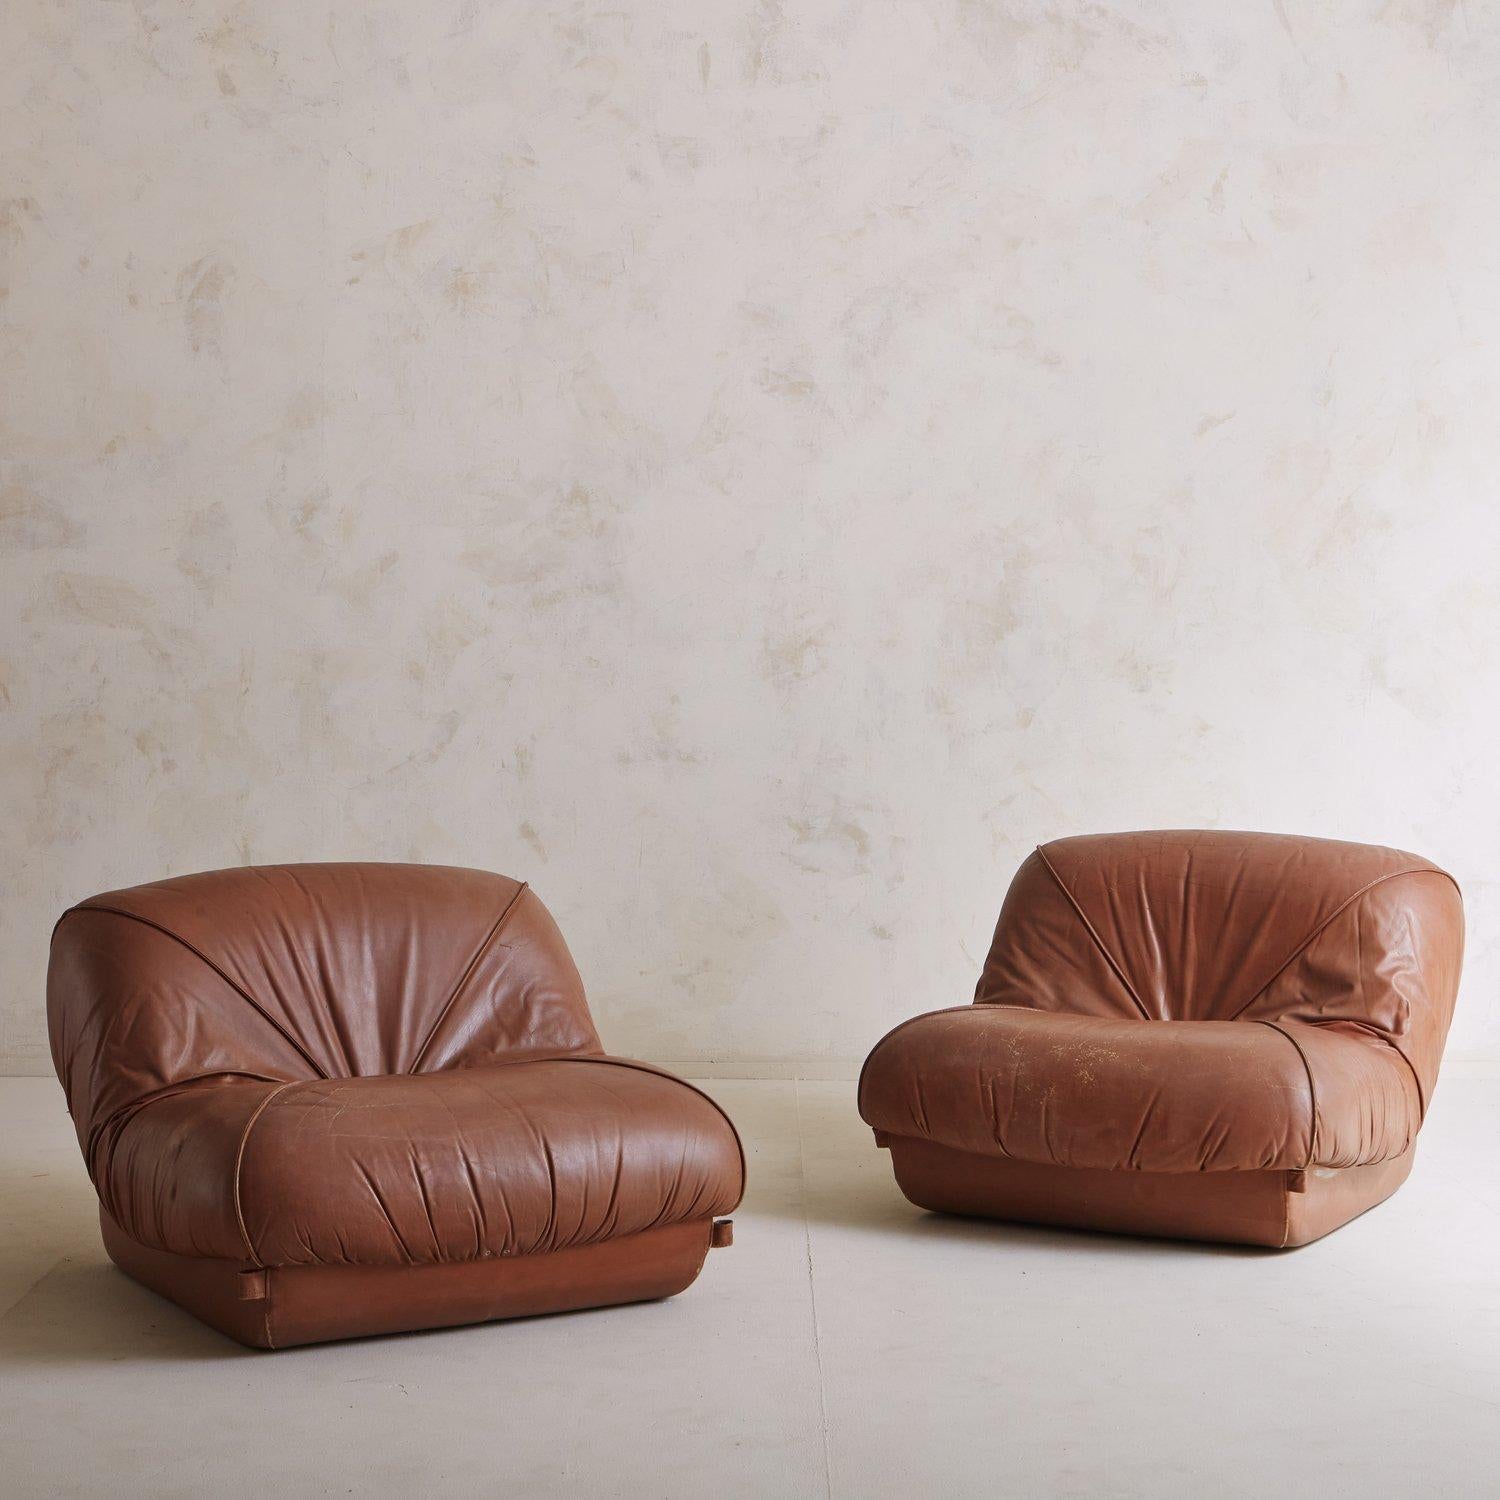 A pair of mid century lounge chairs featuring dramatically ruched seats and backs. These chairs retain their original cognac leather upholstery and the inset bases sit directly on the ground. Sourced in France, 1970s.